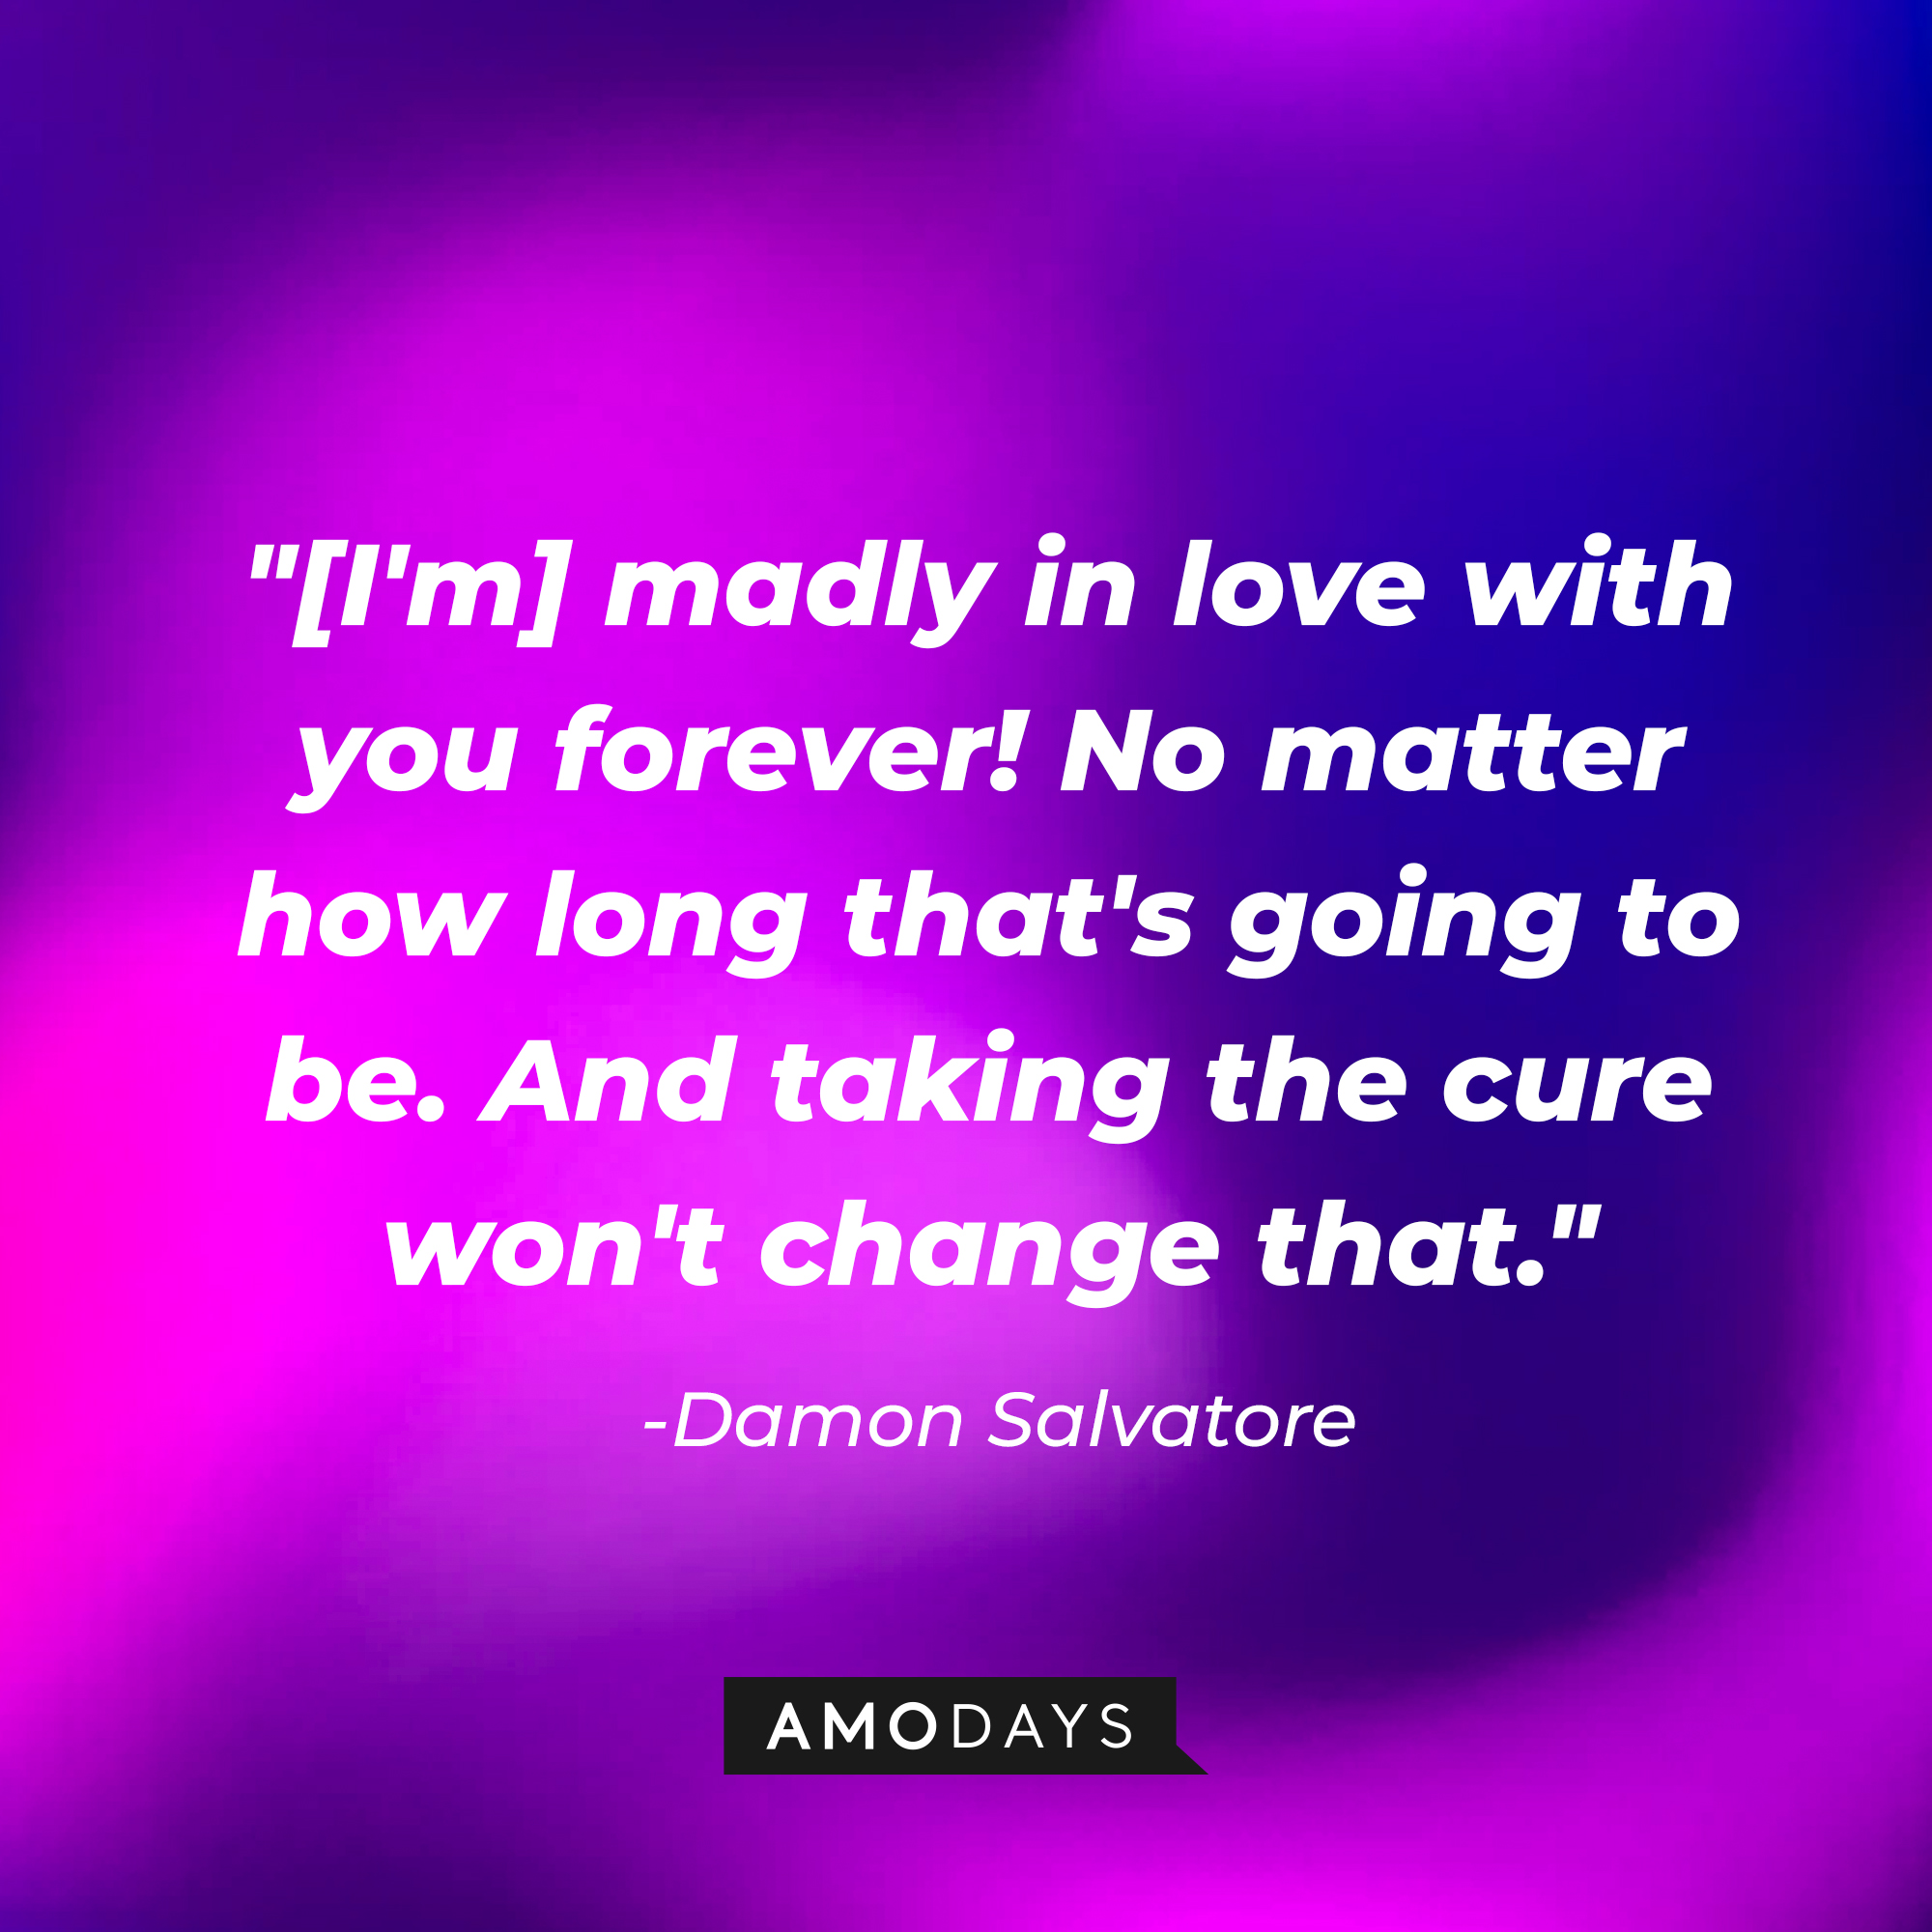 Damon Salvatore's quote: "[I'm] madly in love with you forever! No matter how long that's going to be. And taking the cure won't change that." | Source: AmoDays